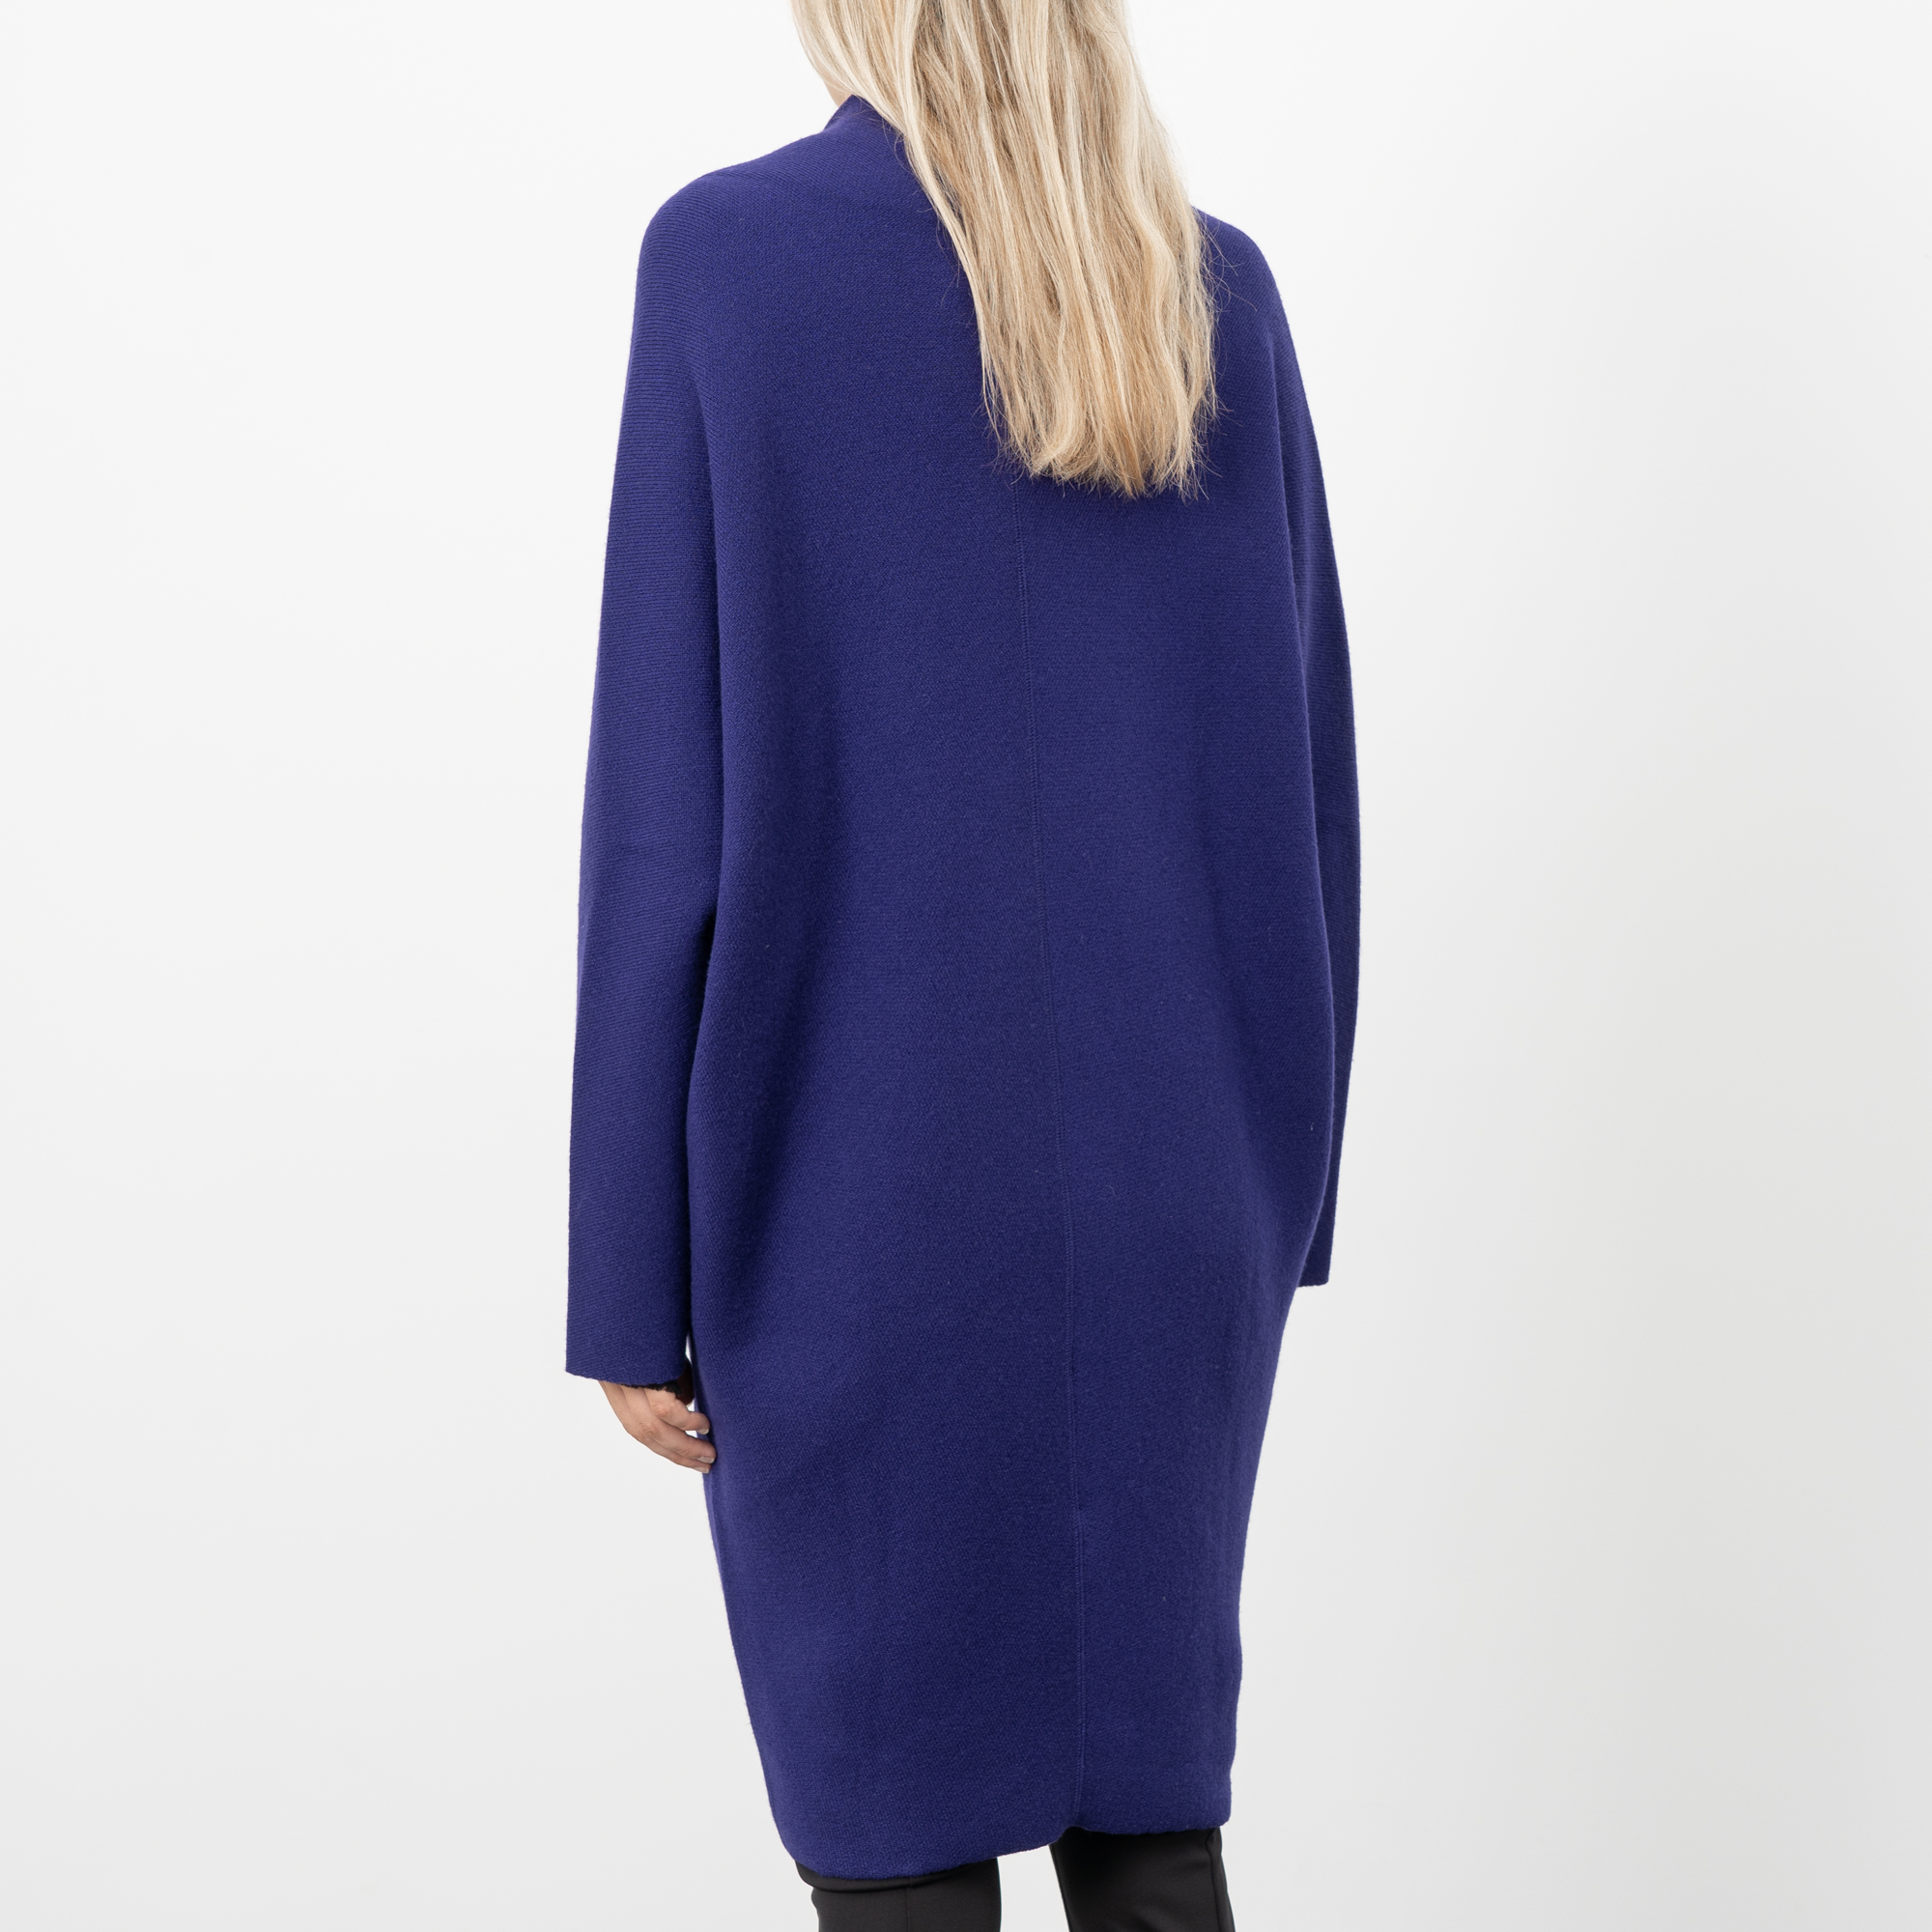 PURPLE KNITTED CASHMERE COAT|wolfensson